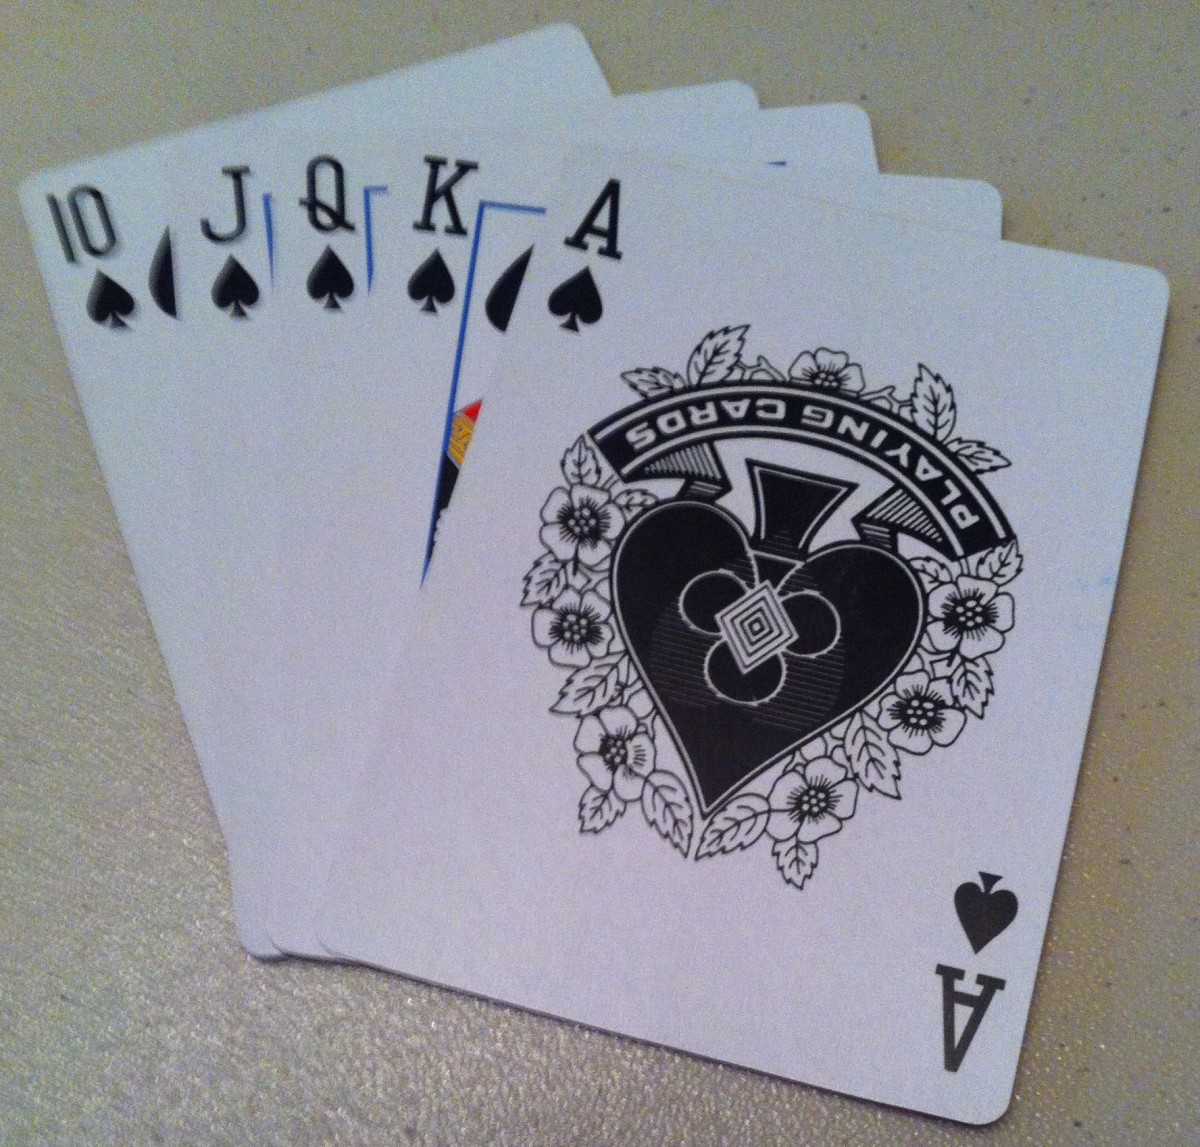 A royal flush, the best hand in poker.